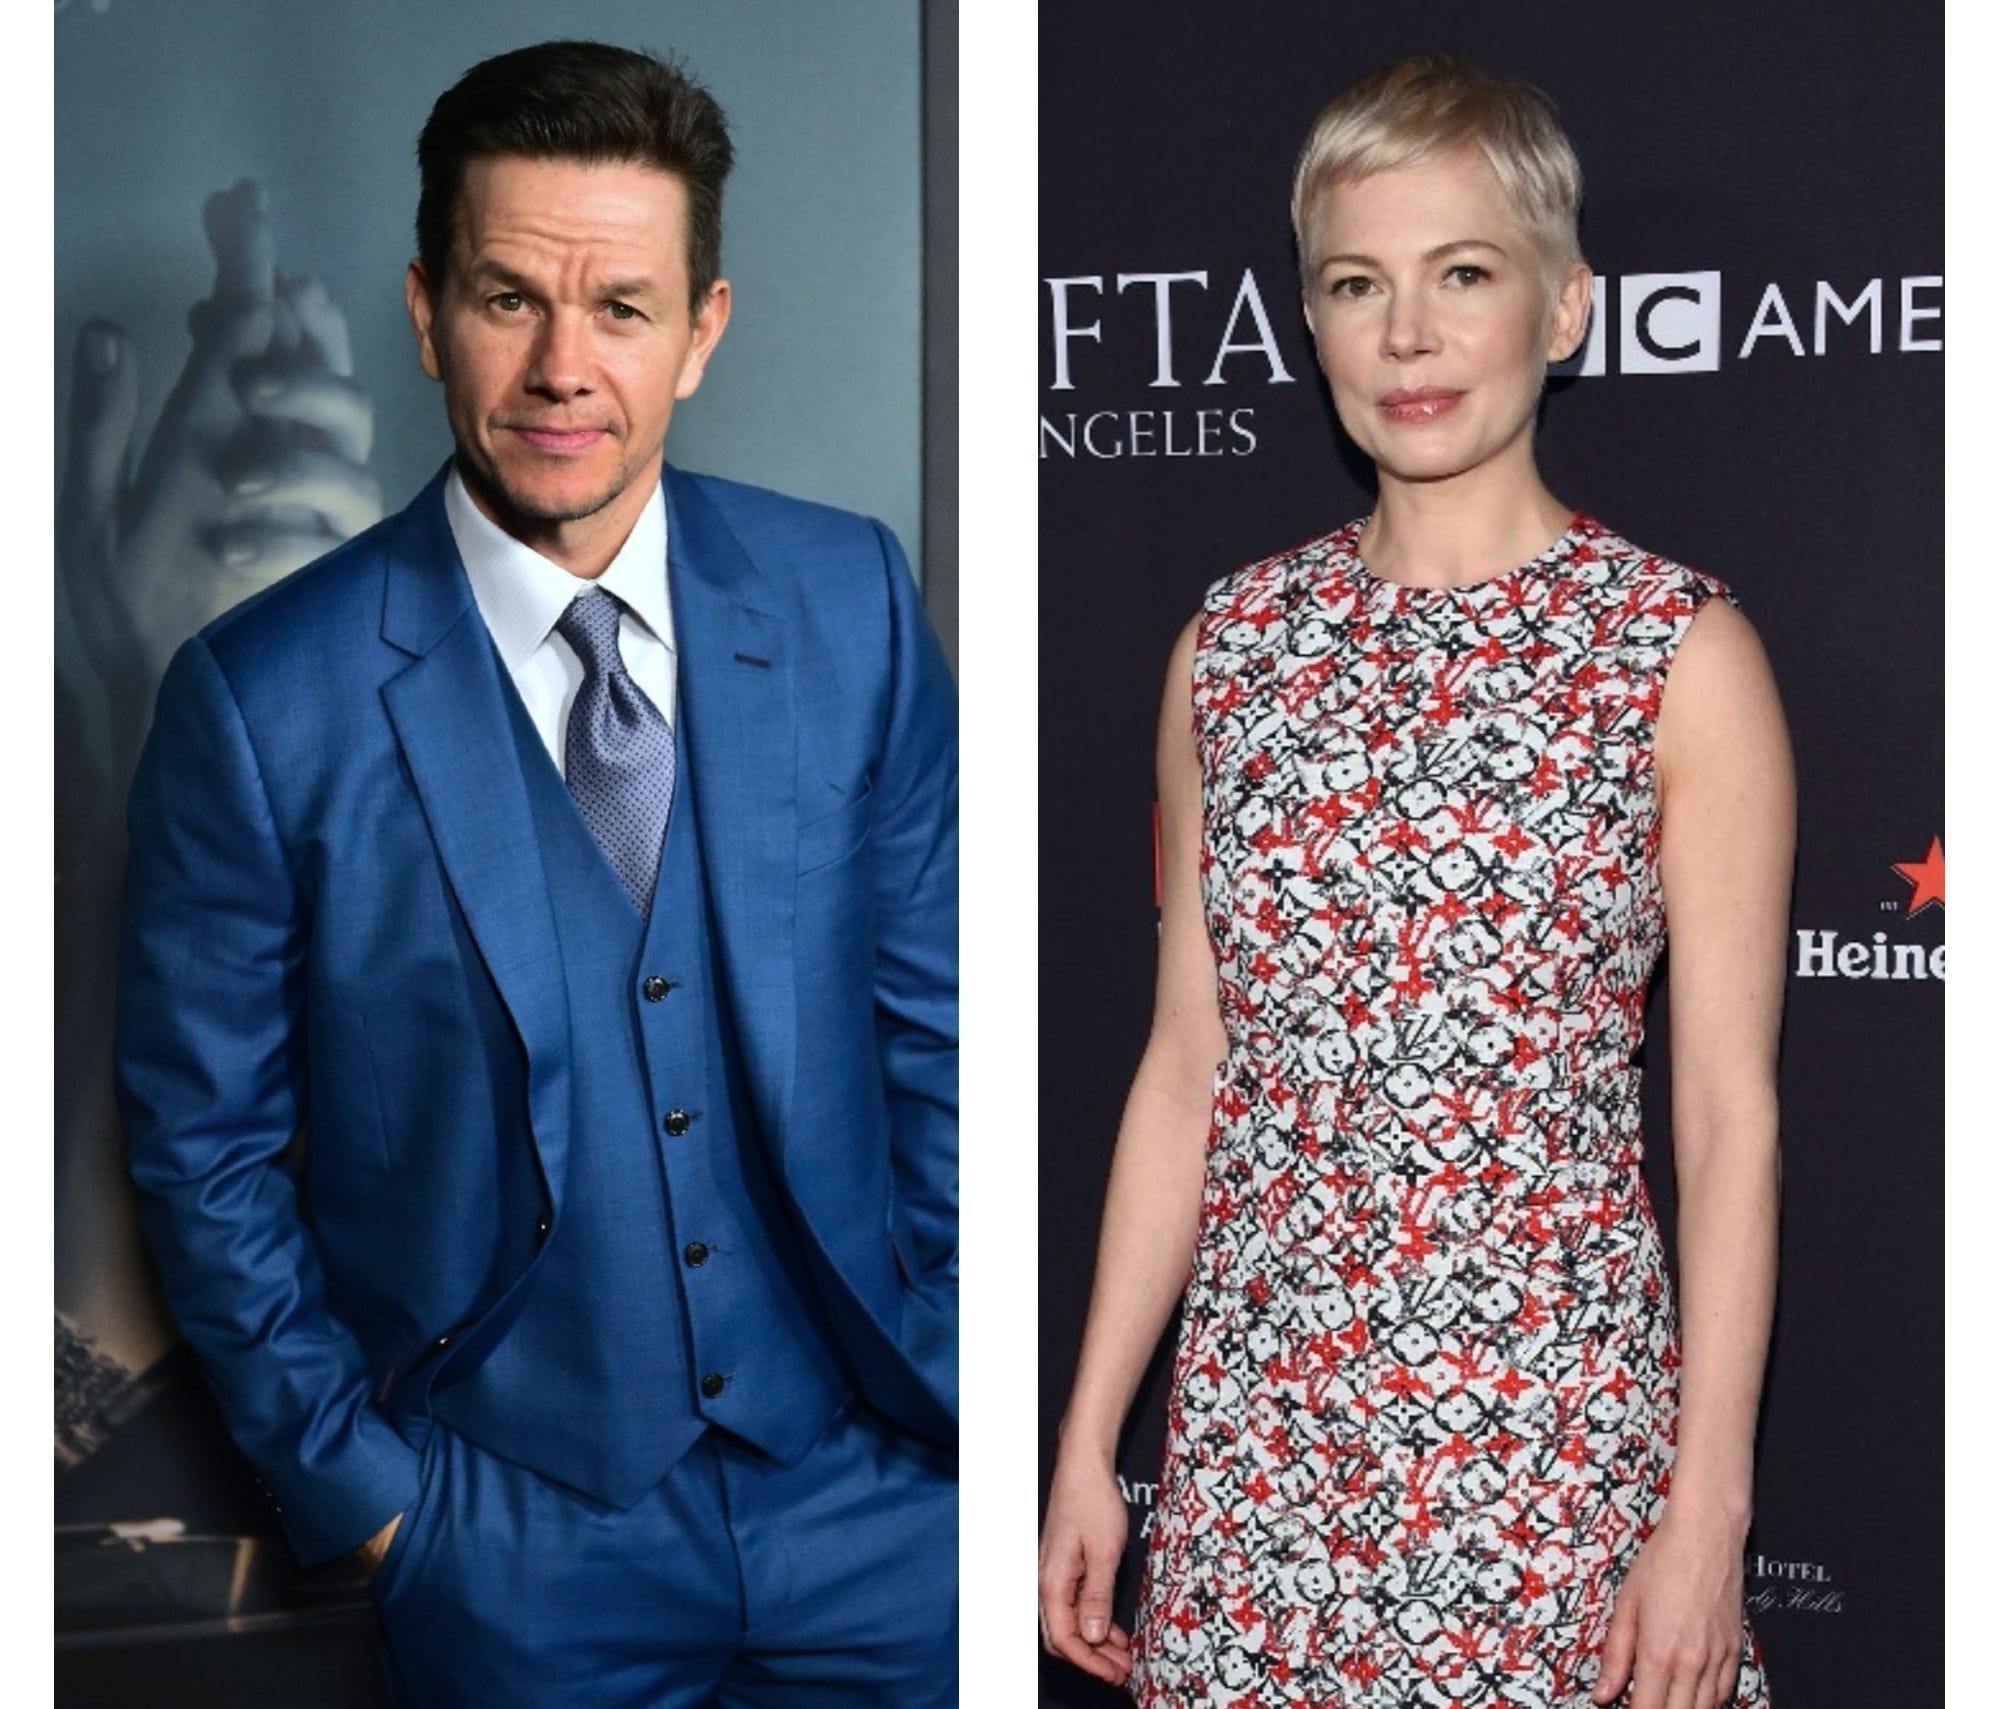 A pay gap scandal has erupted over the 'All the Money in the World' reshoots.